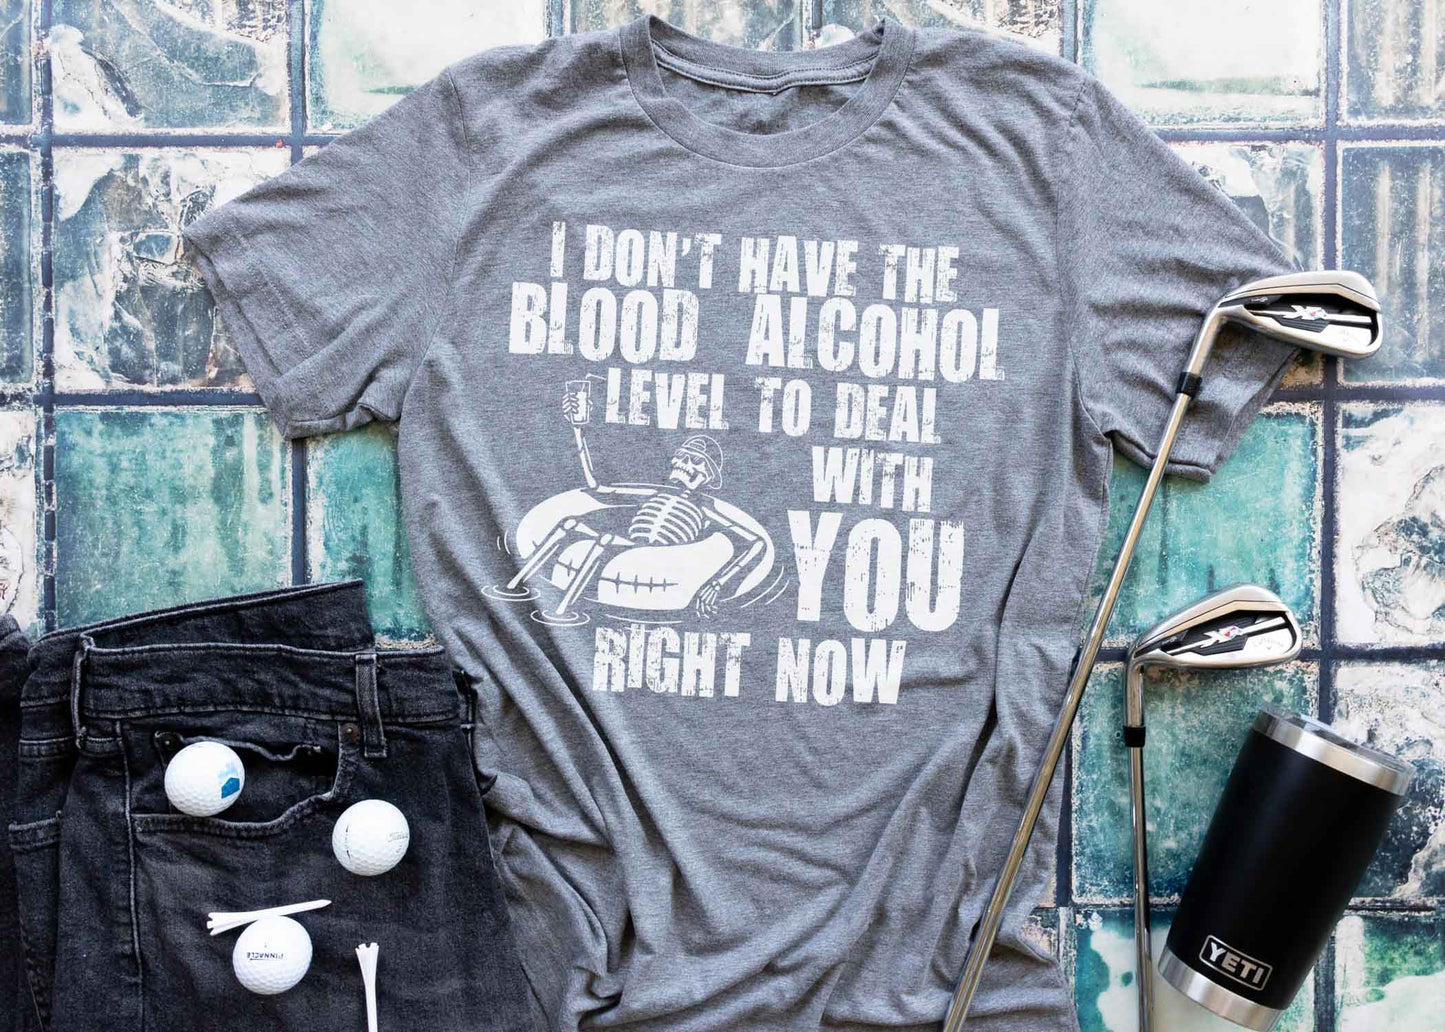 T-Shirt Men's I DON'T HAVE THE BLOOD ALCOHOL LEVEL TO DEAL WITH YOU RIGHT NOW